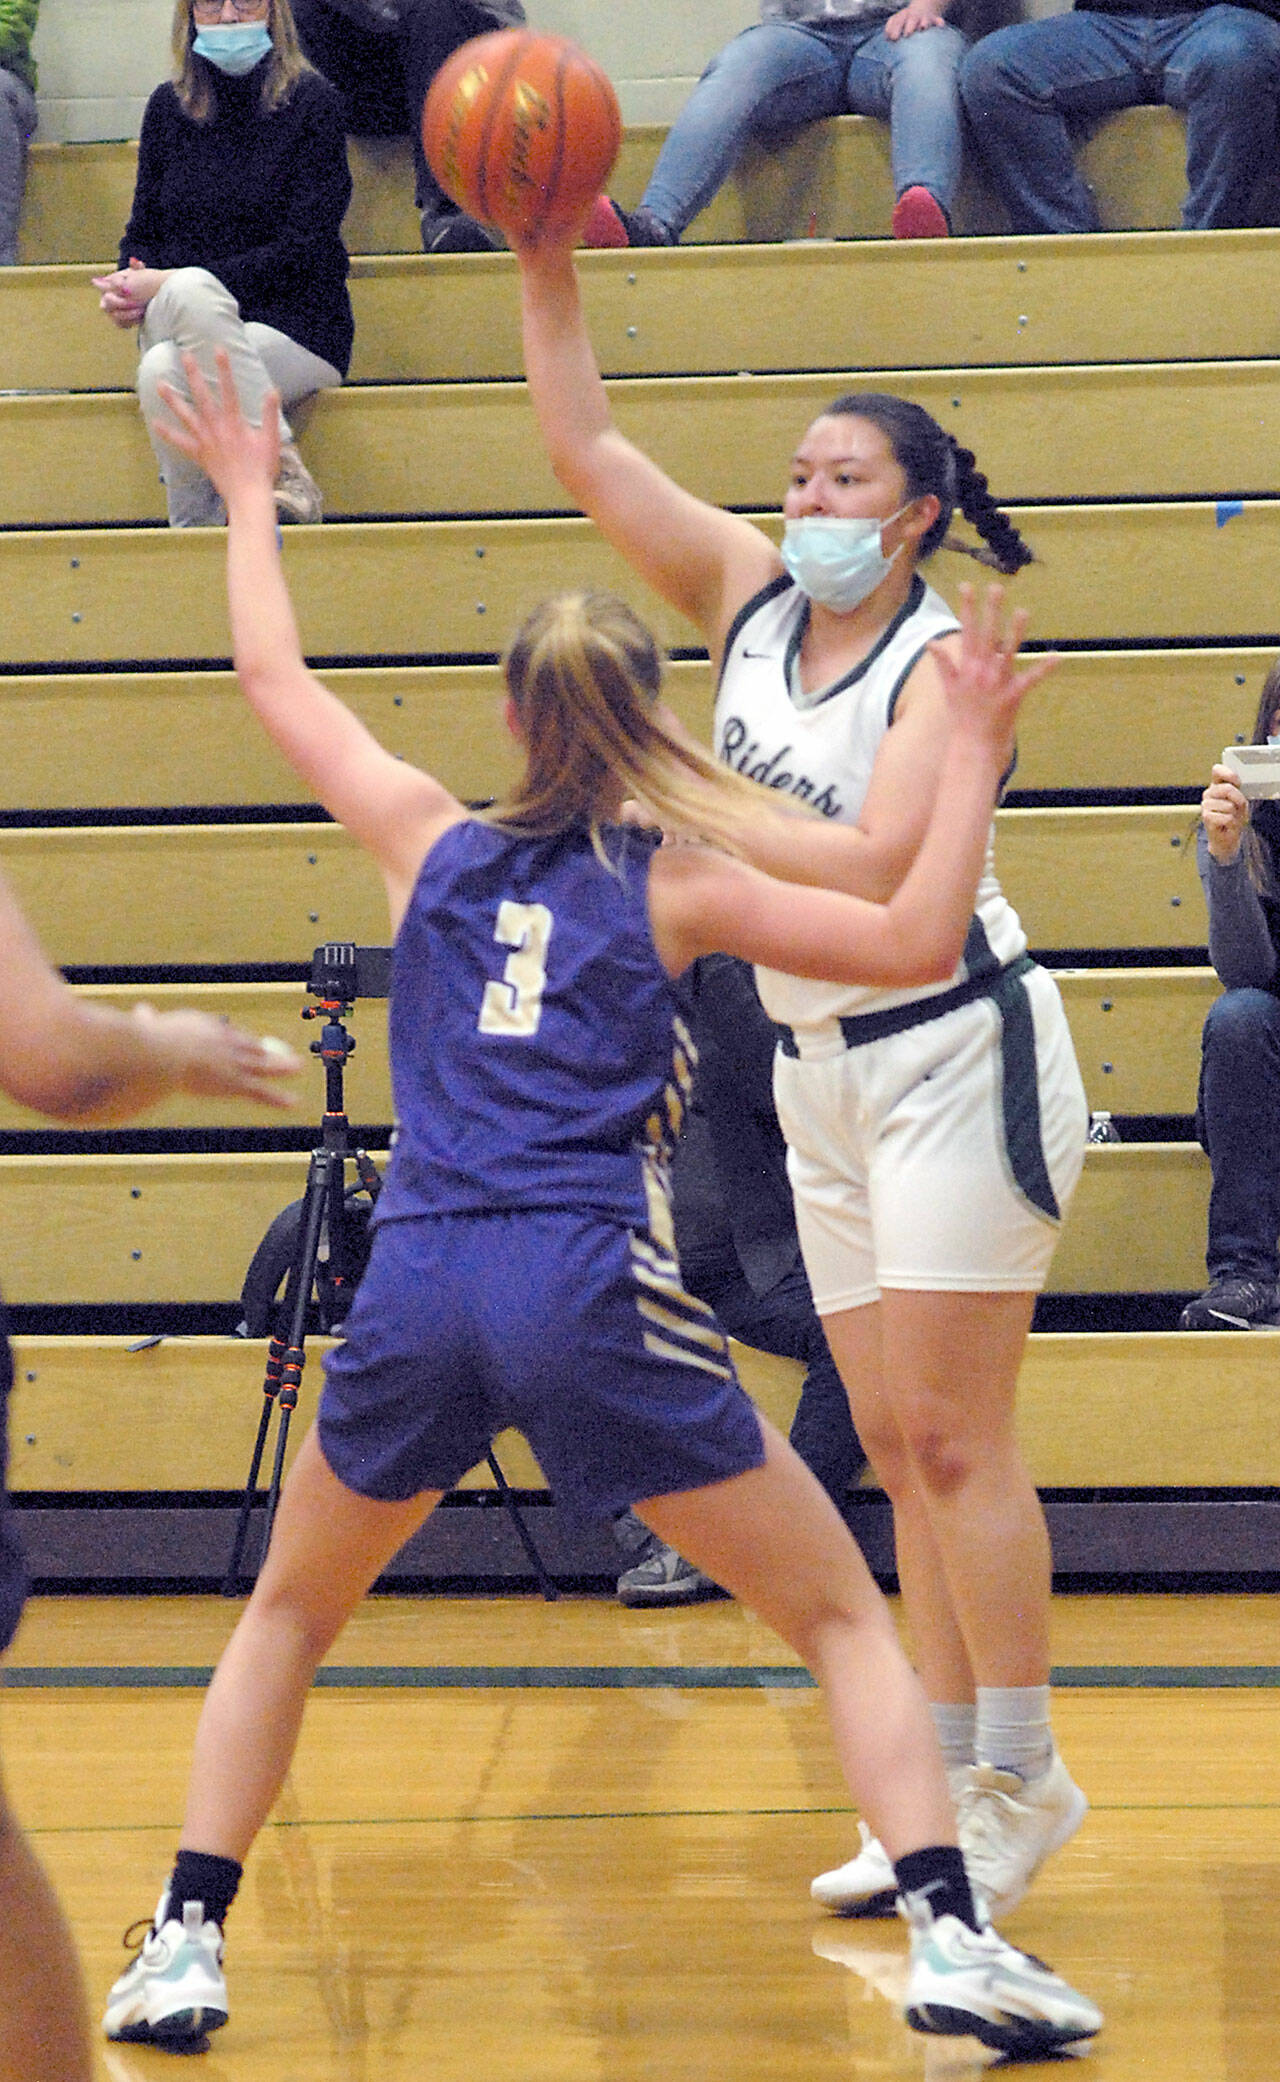 Keith Thorpe/Peninsula Daily News Port Angeles’ Angelina Sprague, right, makes a high pass over the head of North Kitsap’s Evelyn Beers on Thursday at Port Angeles High School.